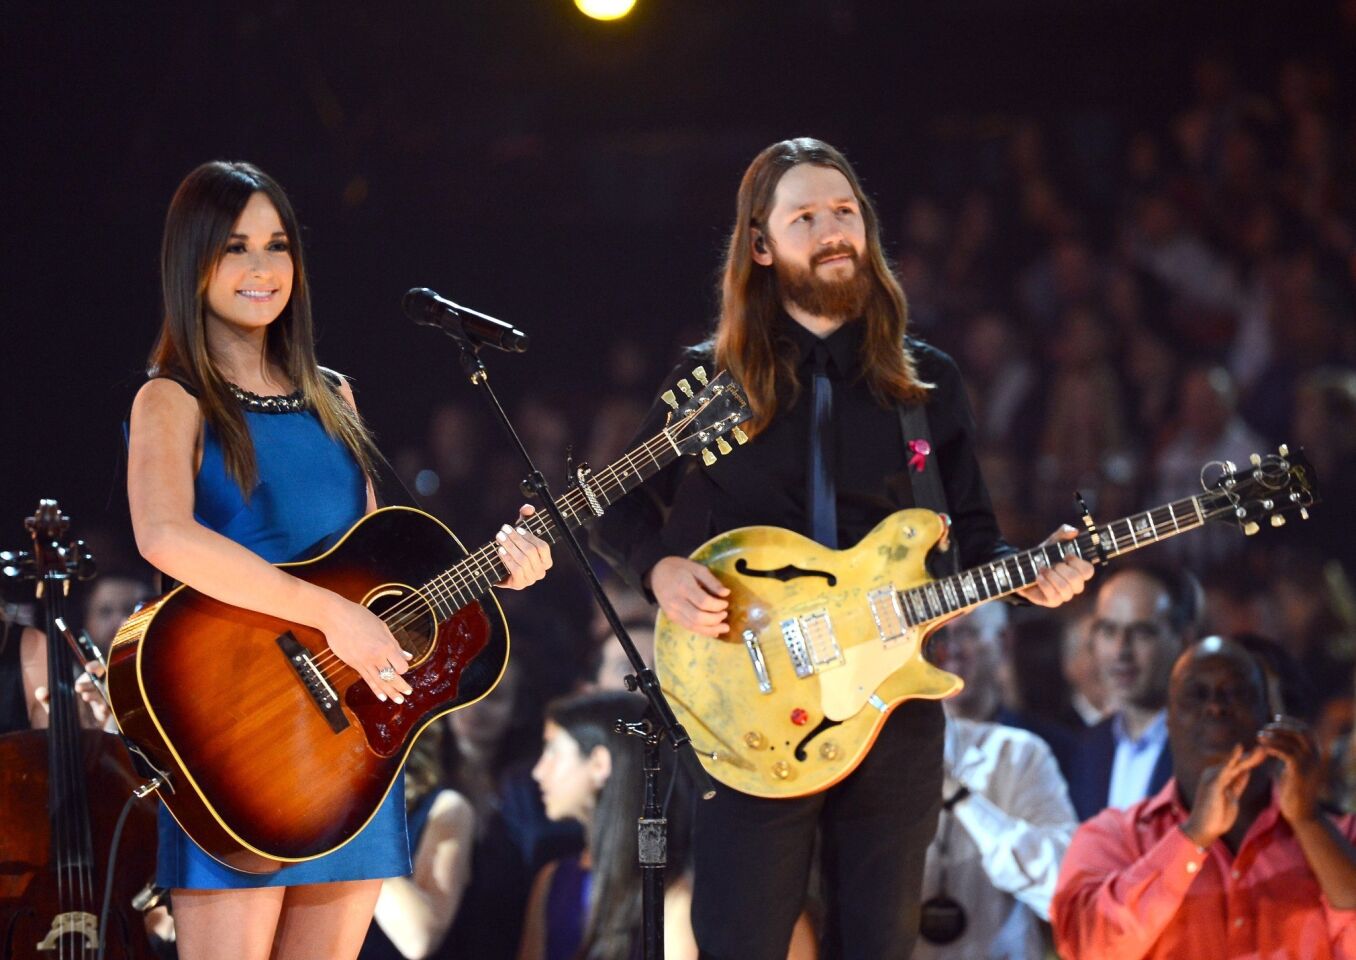 Singer Kacey Musgraves and another performer onstage during the 2013 Billboard Music Awards.